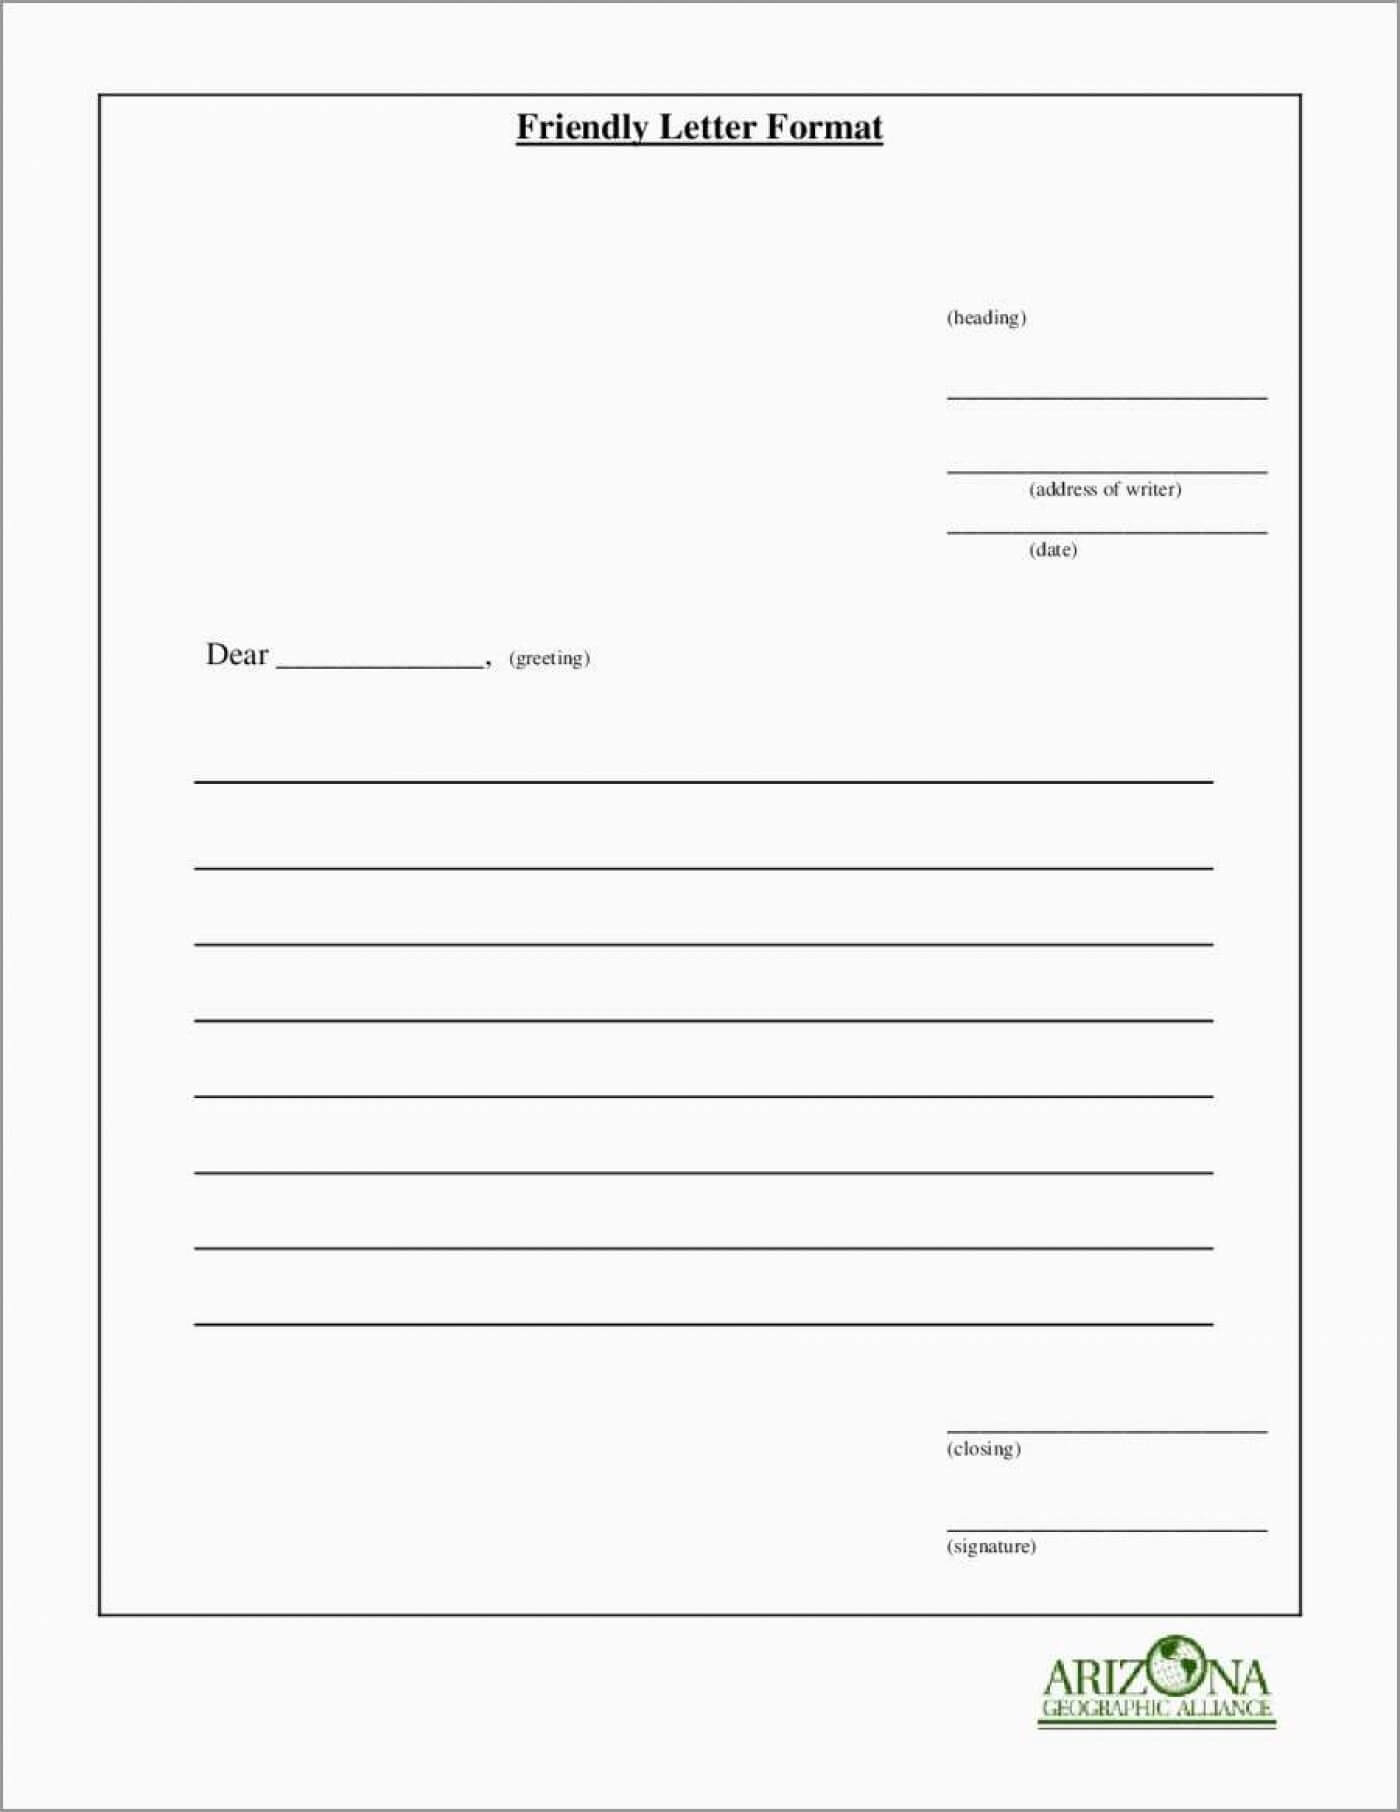 010 Free Letter Writing Template Best Ideas Hindi Format Pdf Inside Blank Letter Writing Template For Kids